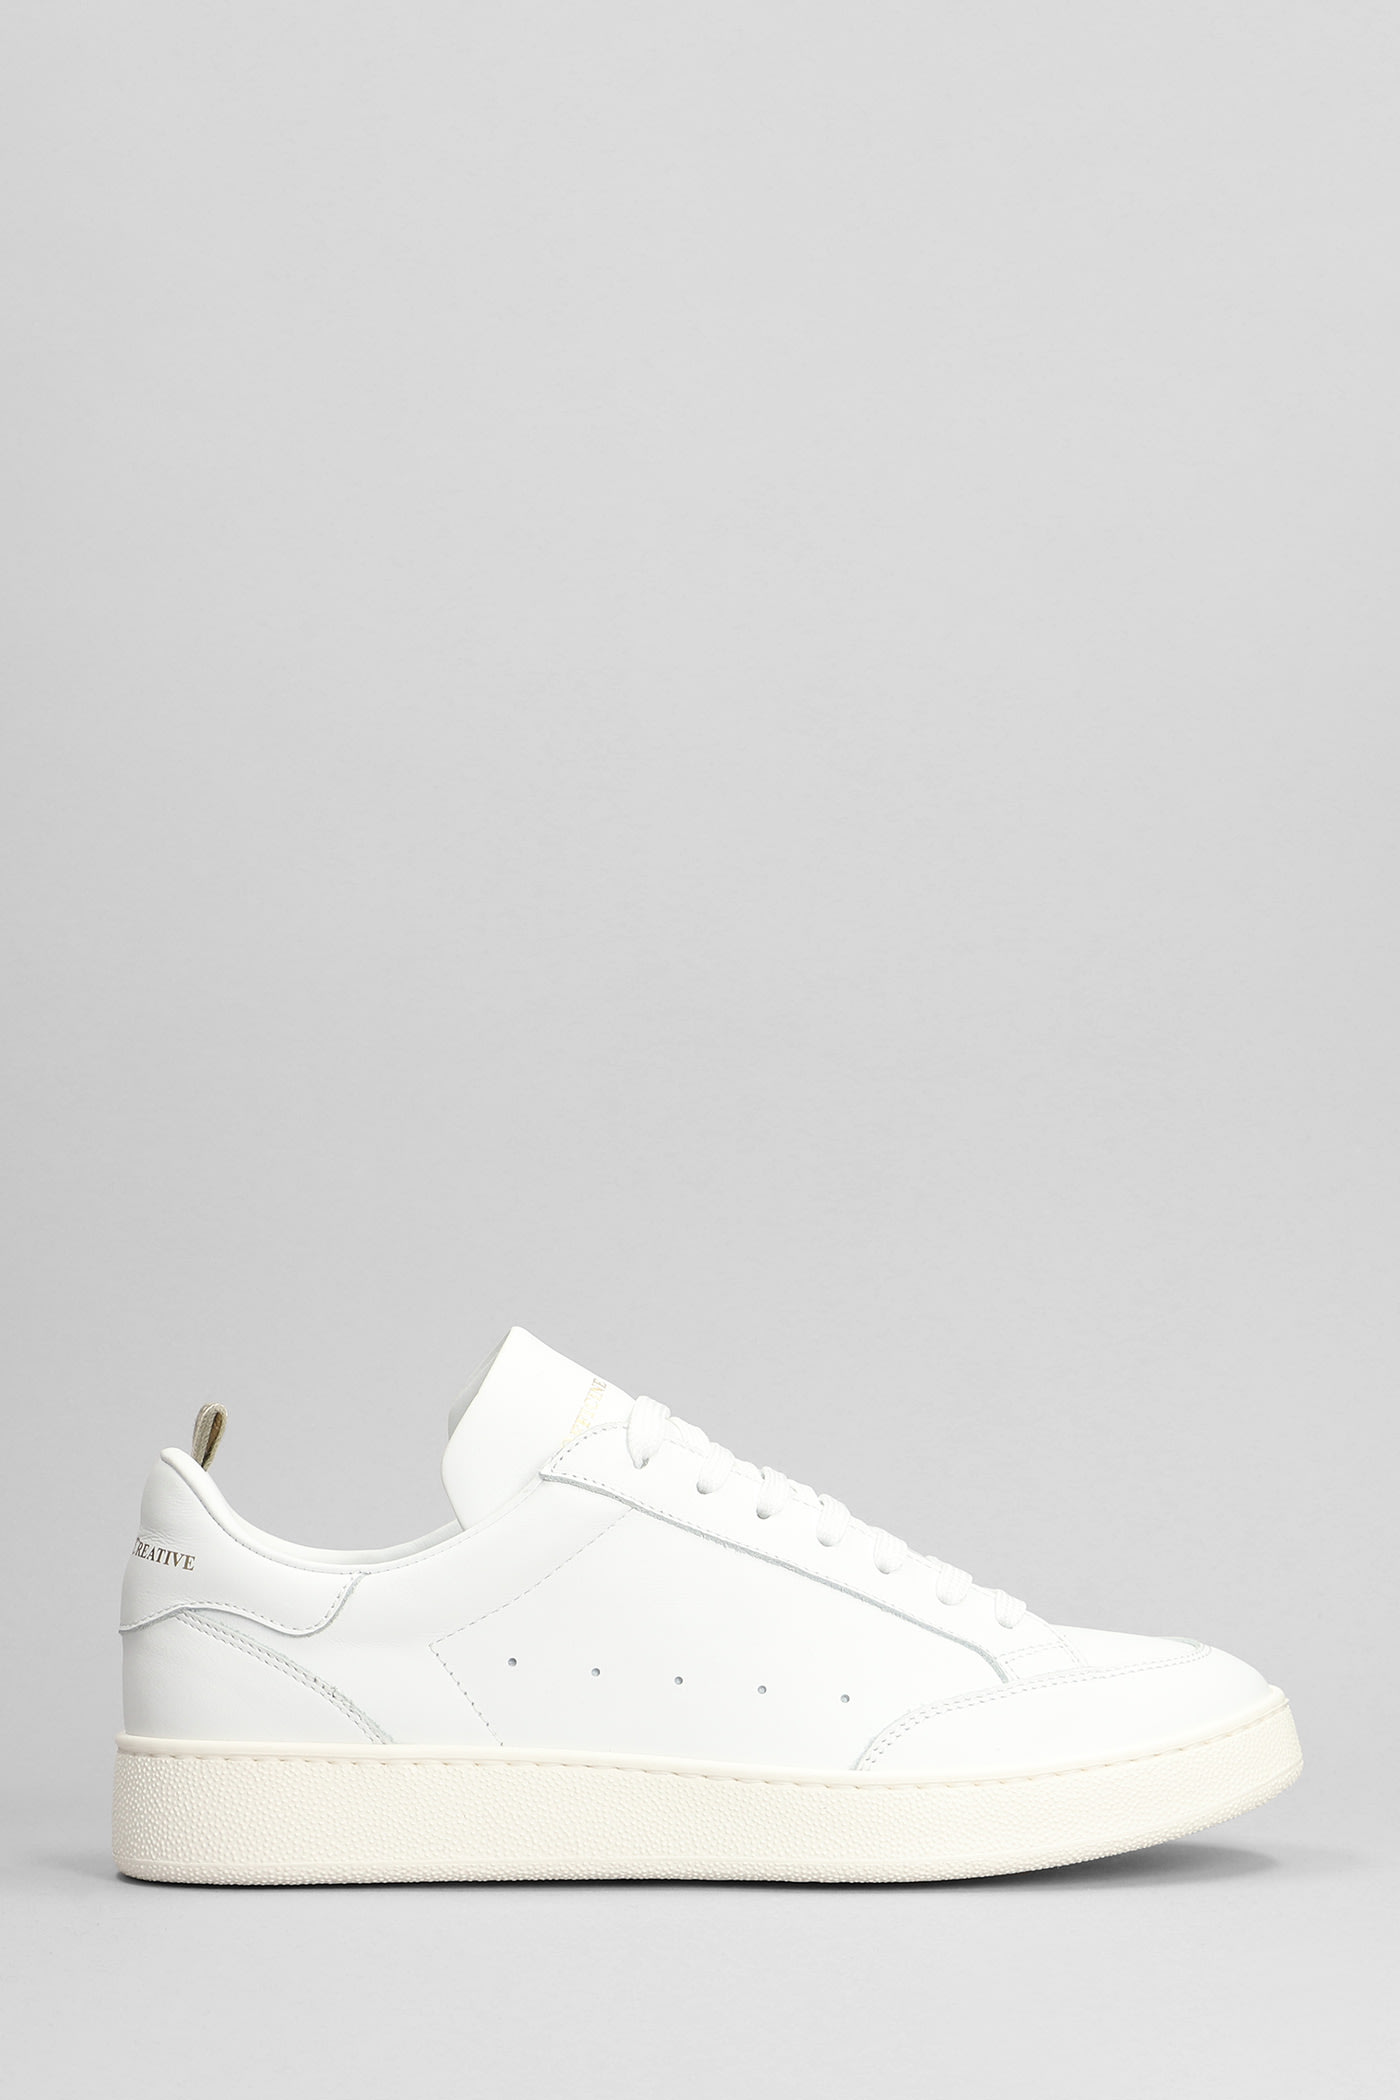 OFFICINE CREATIVE MOWER SNEAKERS IN WHITE LEATHER